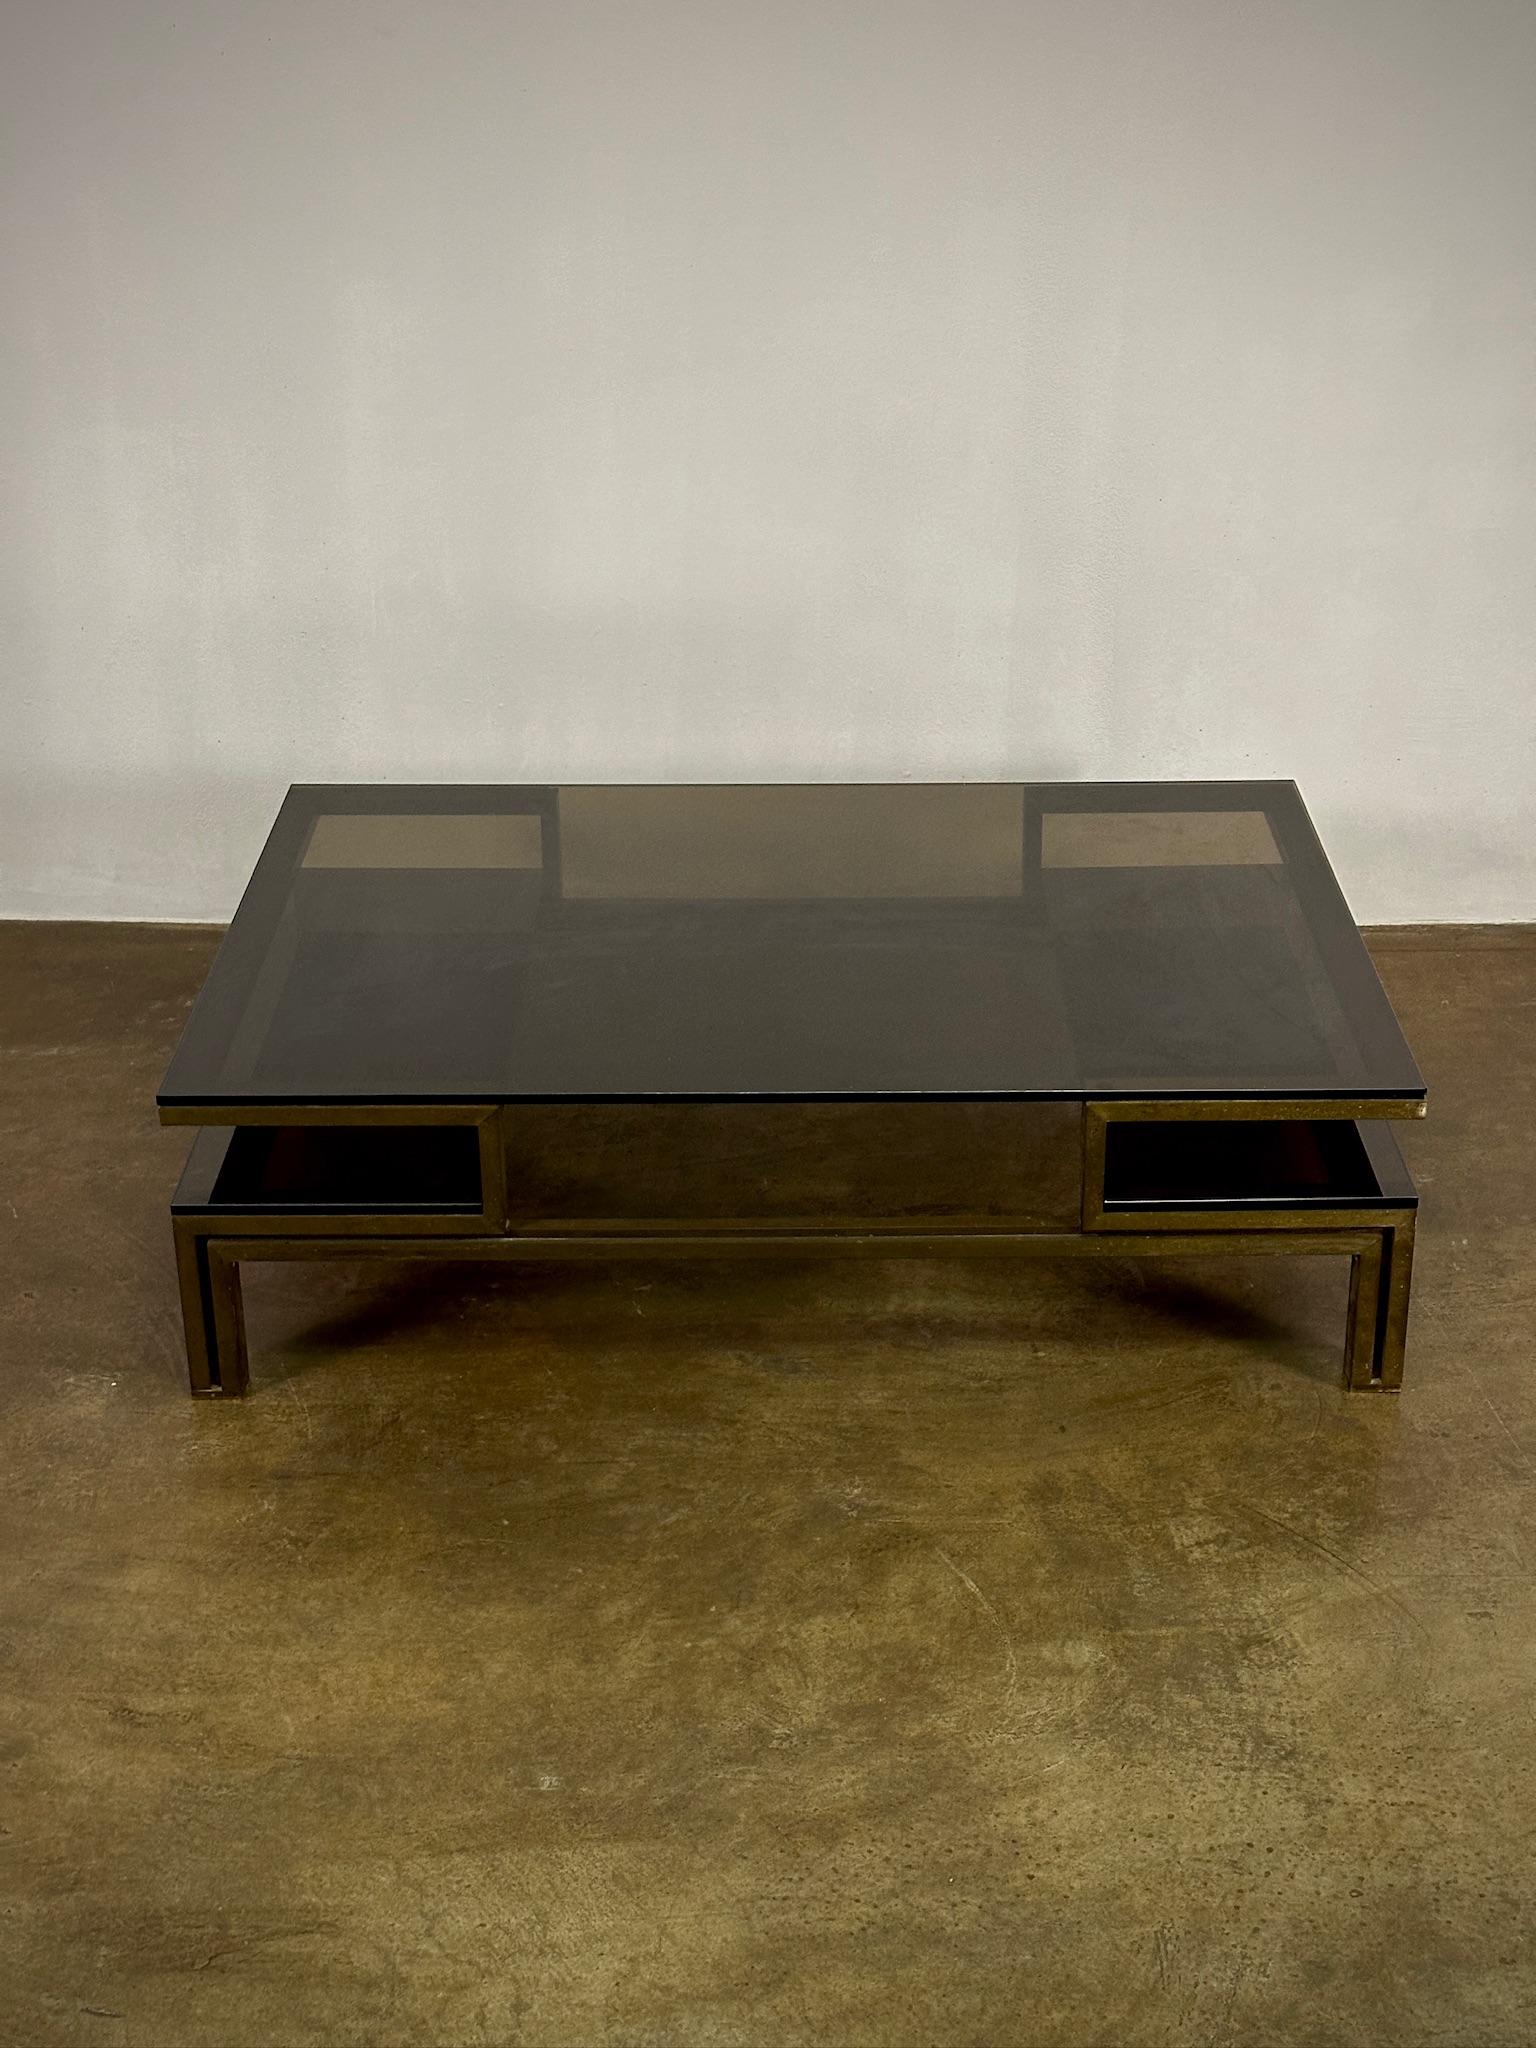 Belgian mid-century coffee table with glass top and geometric brass base. Sleek yet understated with a low, floating profile.

Belgium, circa 1970

Dimensions: 47.5W x 31.5D x 13.5H